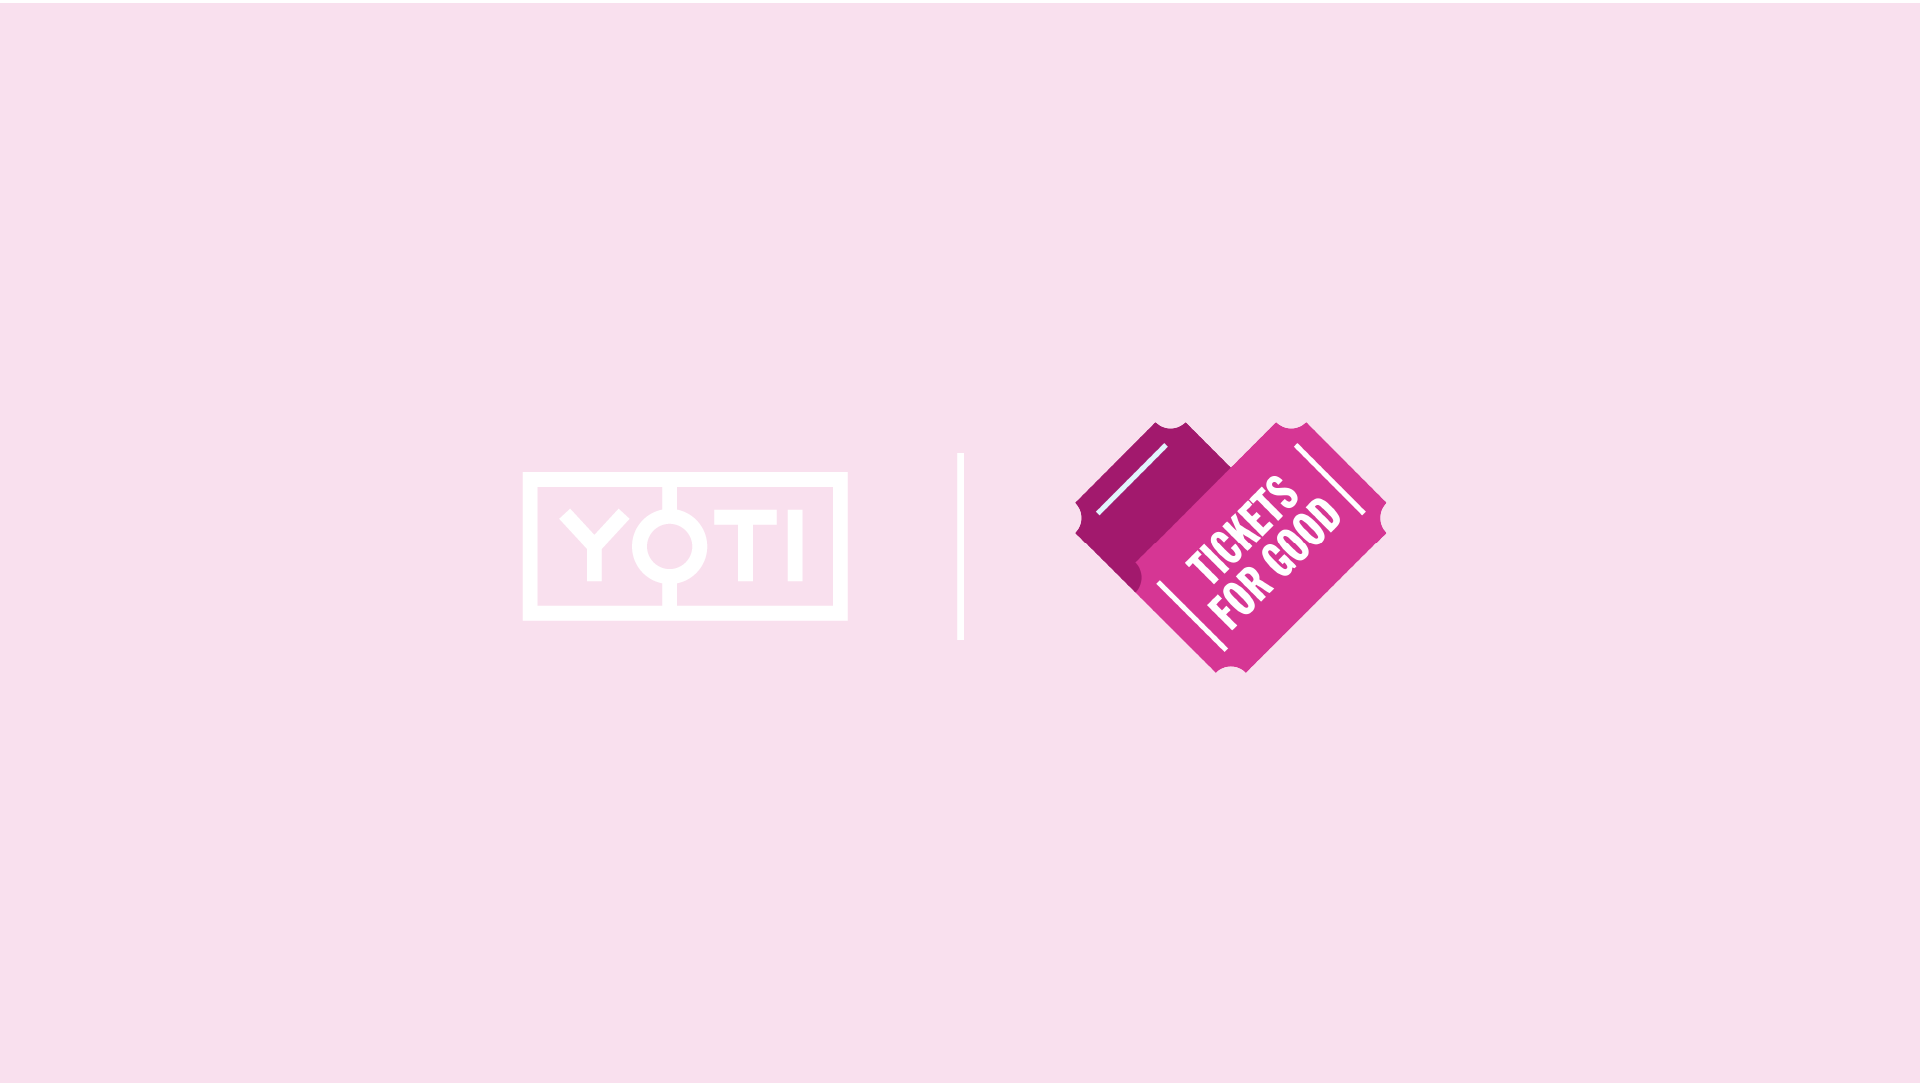 Yoti partners with the Ticket Bank